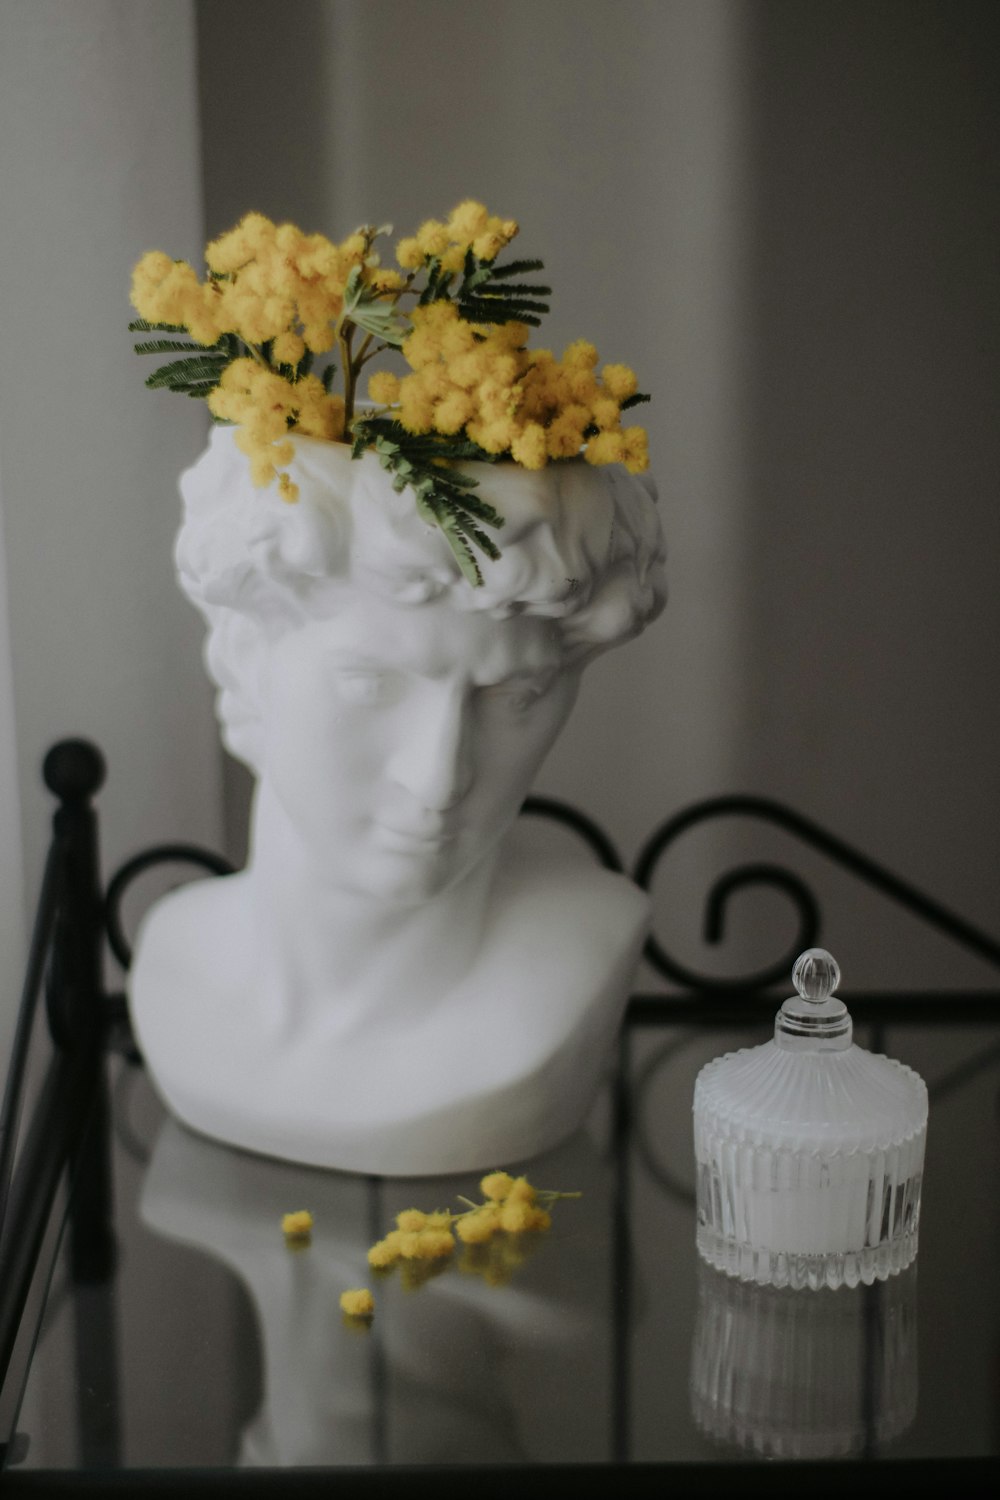 a vase with yellow flowers on top of a glass table